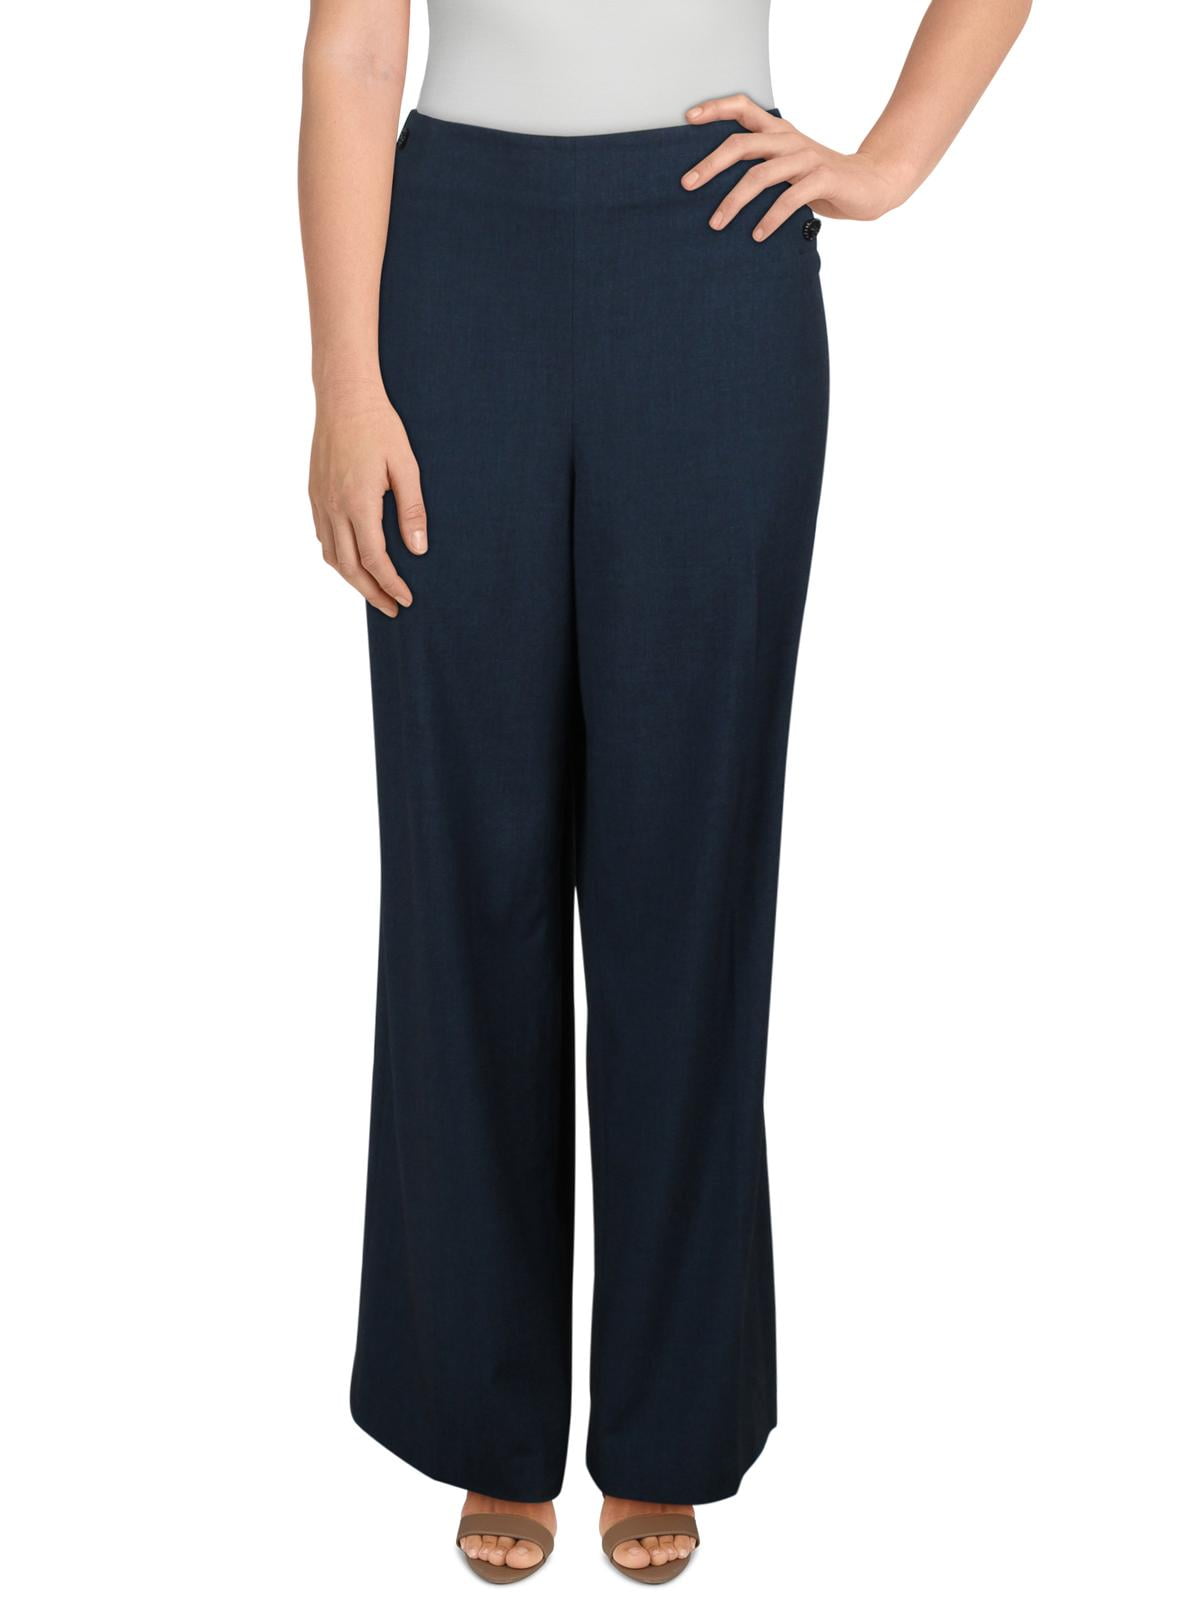 The 9 Best Sailor Pants for Women | Well+Good